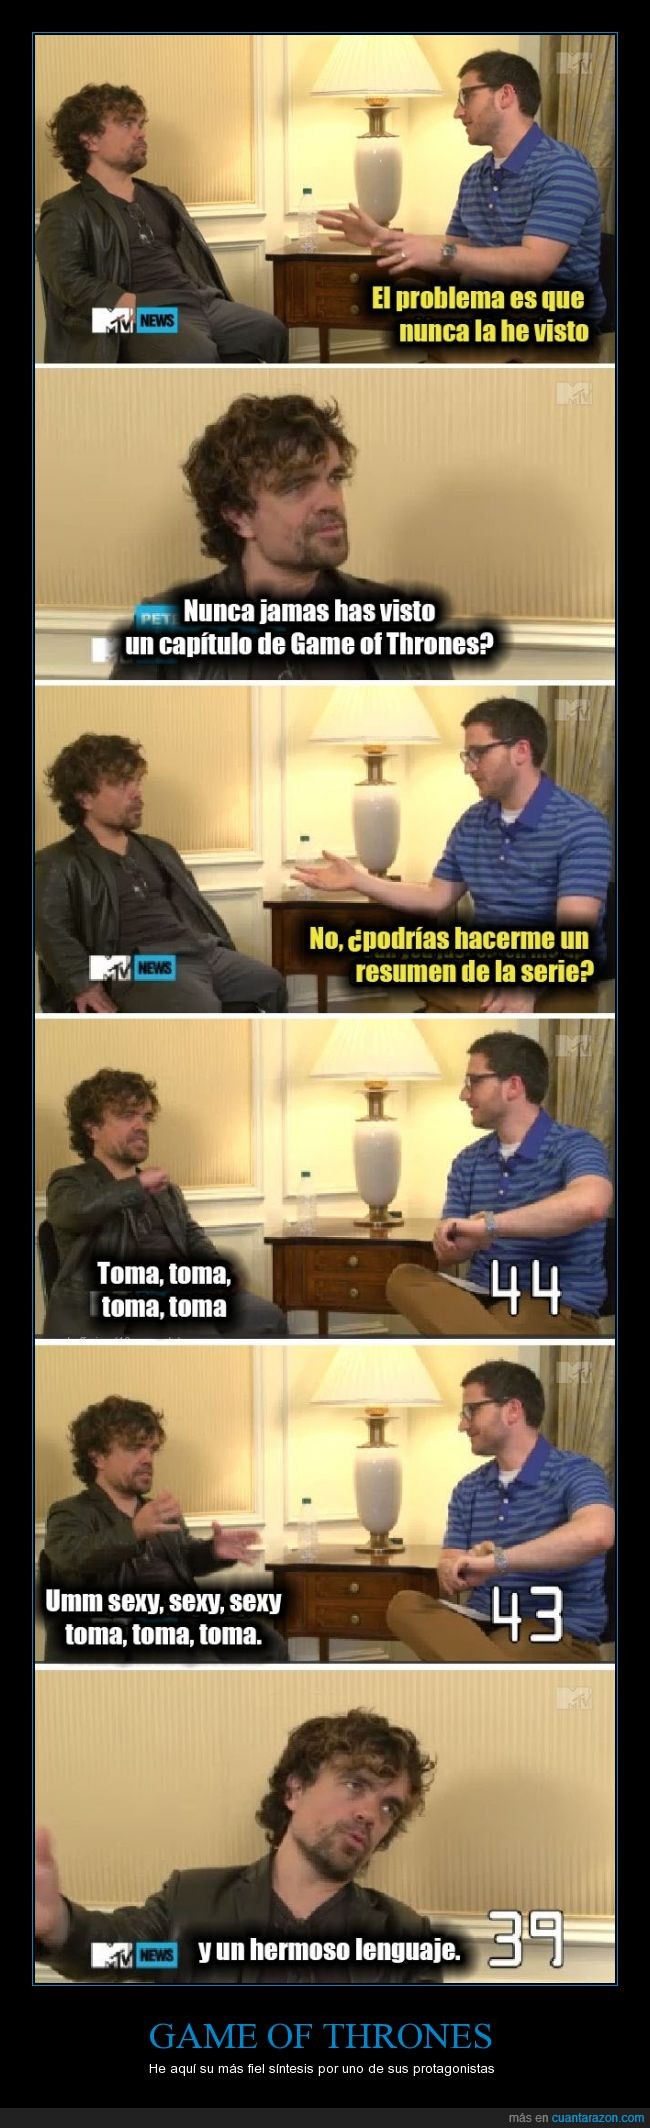 game of throne,toma,enano,game of thrones,Peter Dinklage